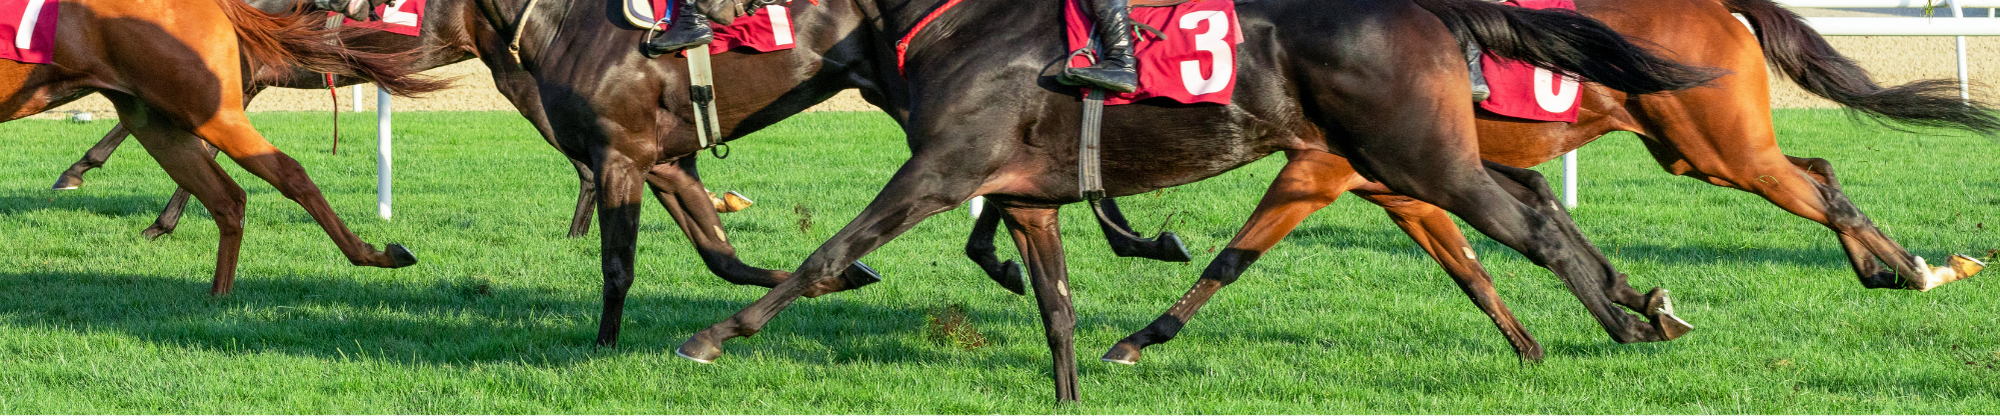 close up of horses racing on grass